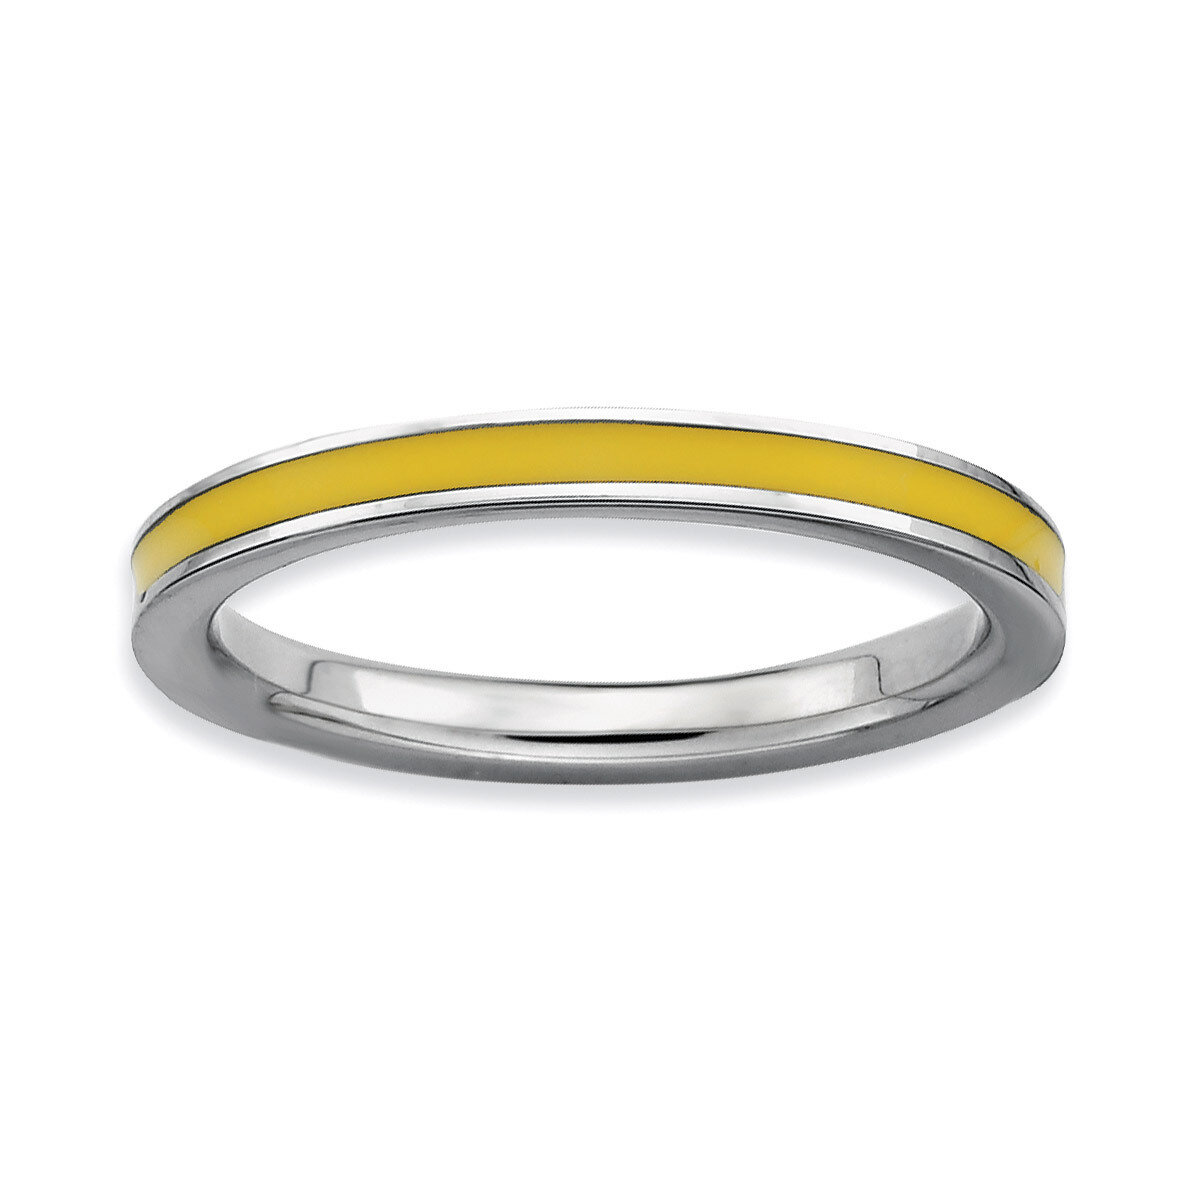 Yellow Enameled 2.25mm Ring - Sterling Silver QSK144